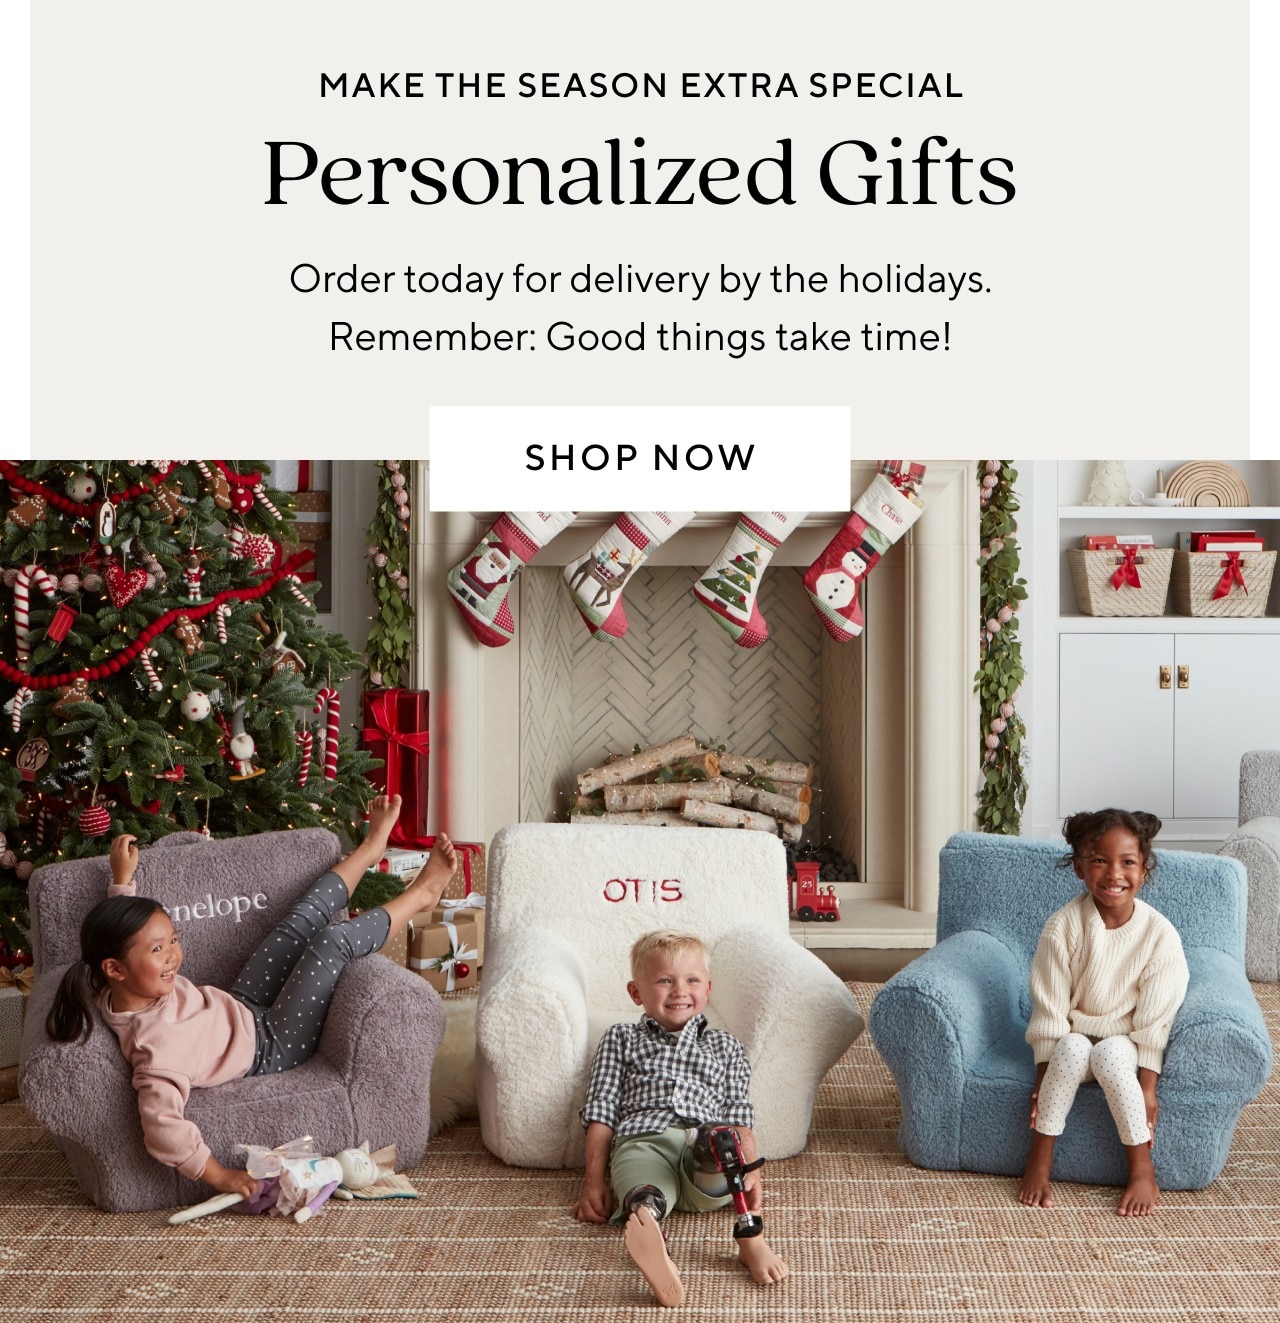 MAKE THE SEASON EXTRA SPECIAL - PERSONALIZED GIFTS